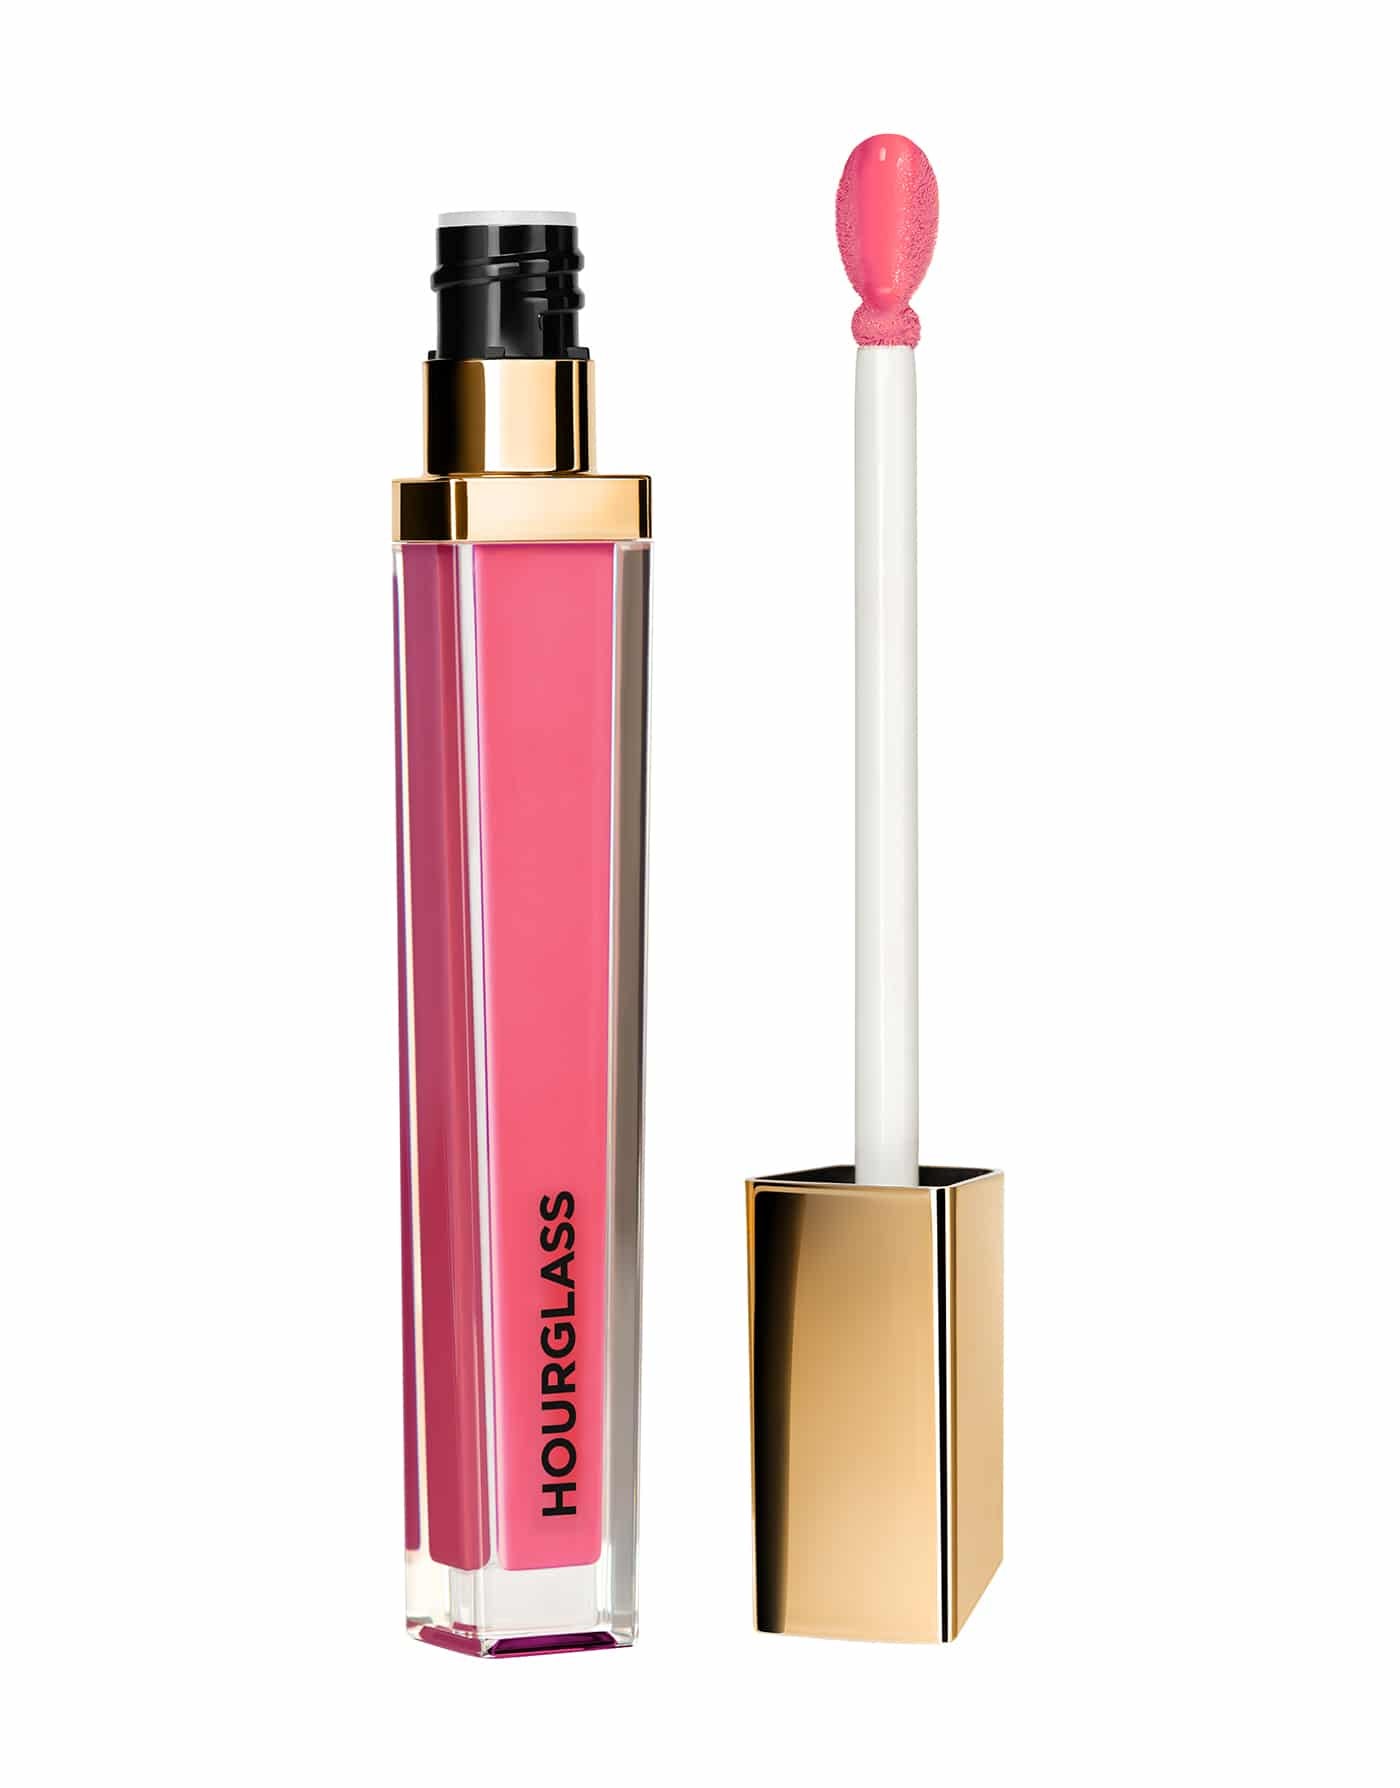 Is Lip Gloss Making A Comeback? Hourglass Bets Their New ‘Unreal’ Lip Gloss It Is